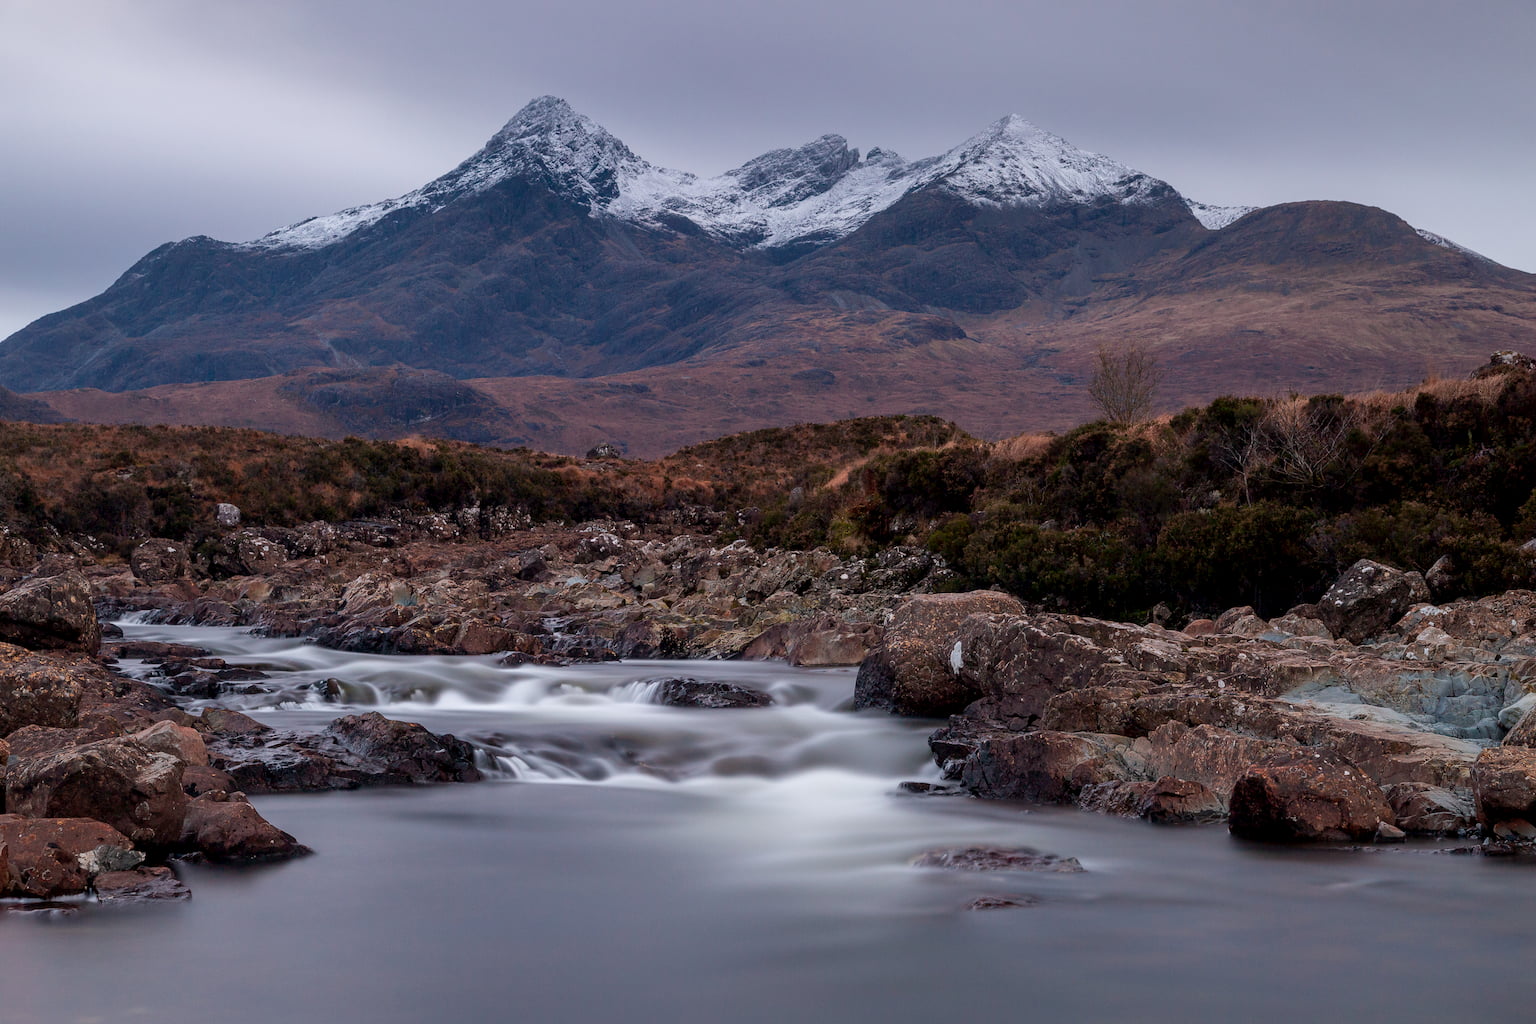 The Cuillin mountains towering over the Allt Deag Mor at Sligachan, Isle of Syke.